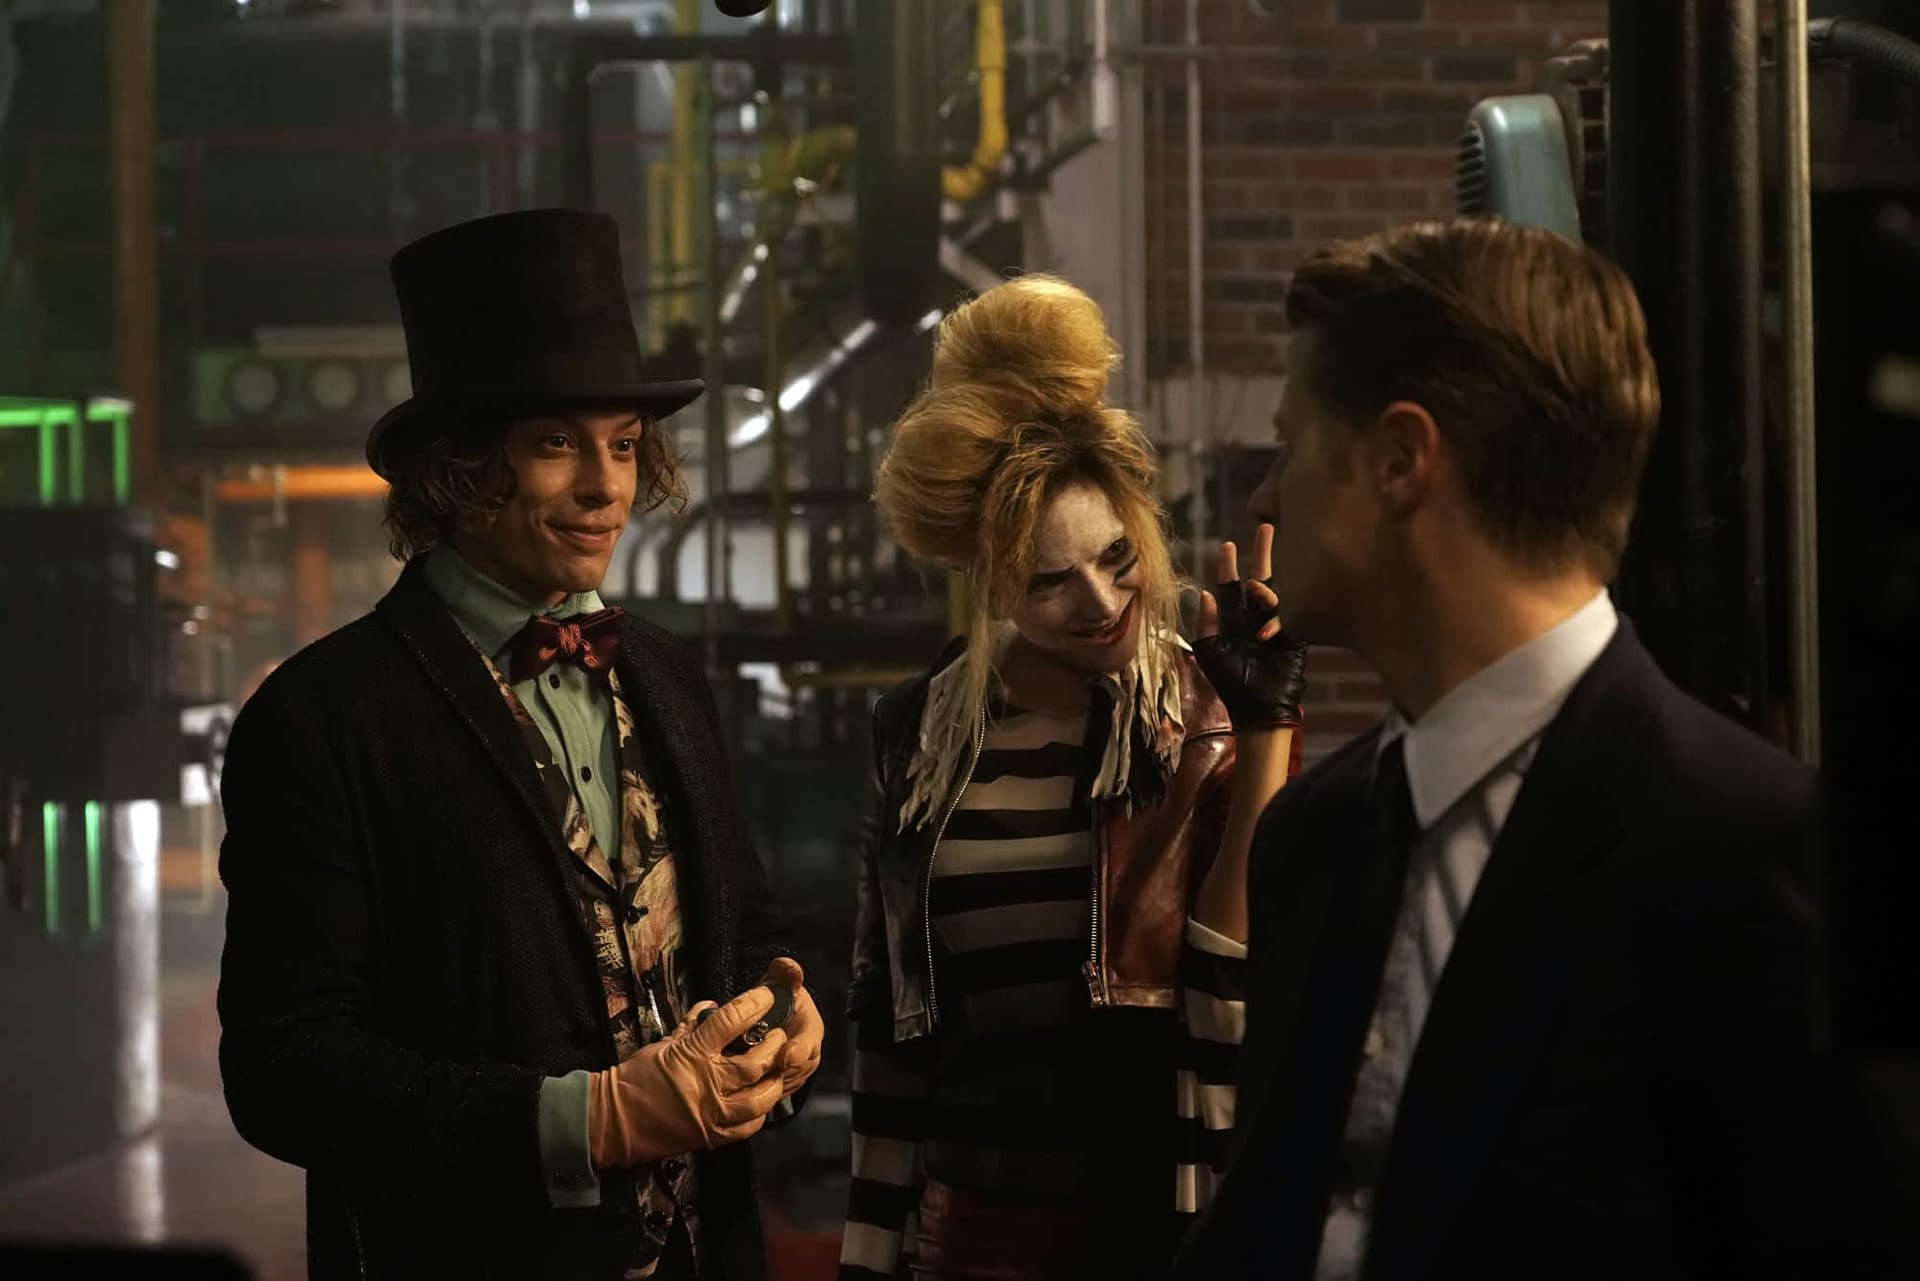 'Gotham' Season 5, Episode 7 "Ace Chemicals" Sets up Satisfying Pool Party [SPOILER REVIEW]